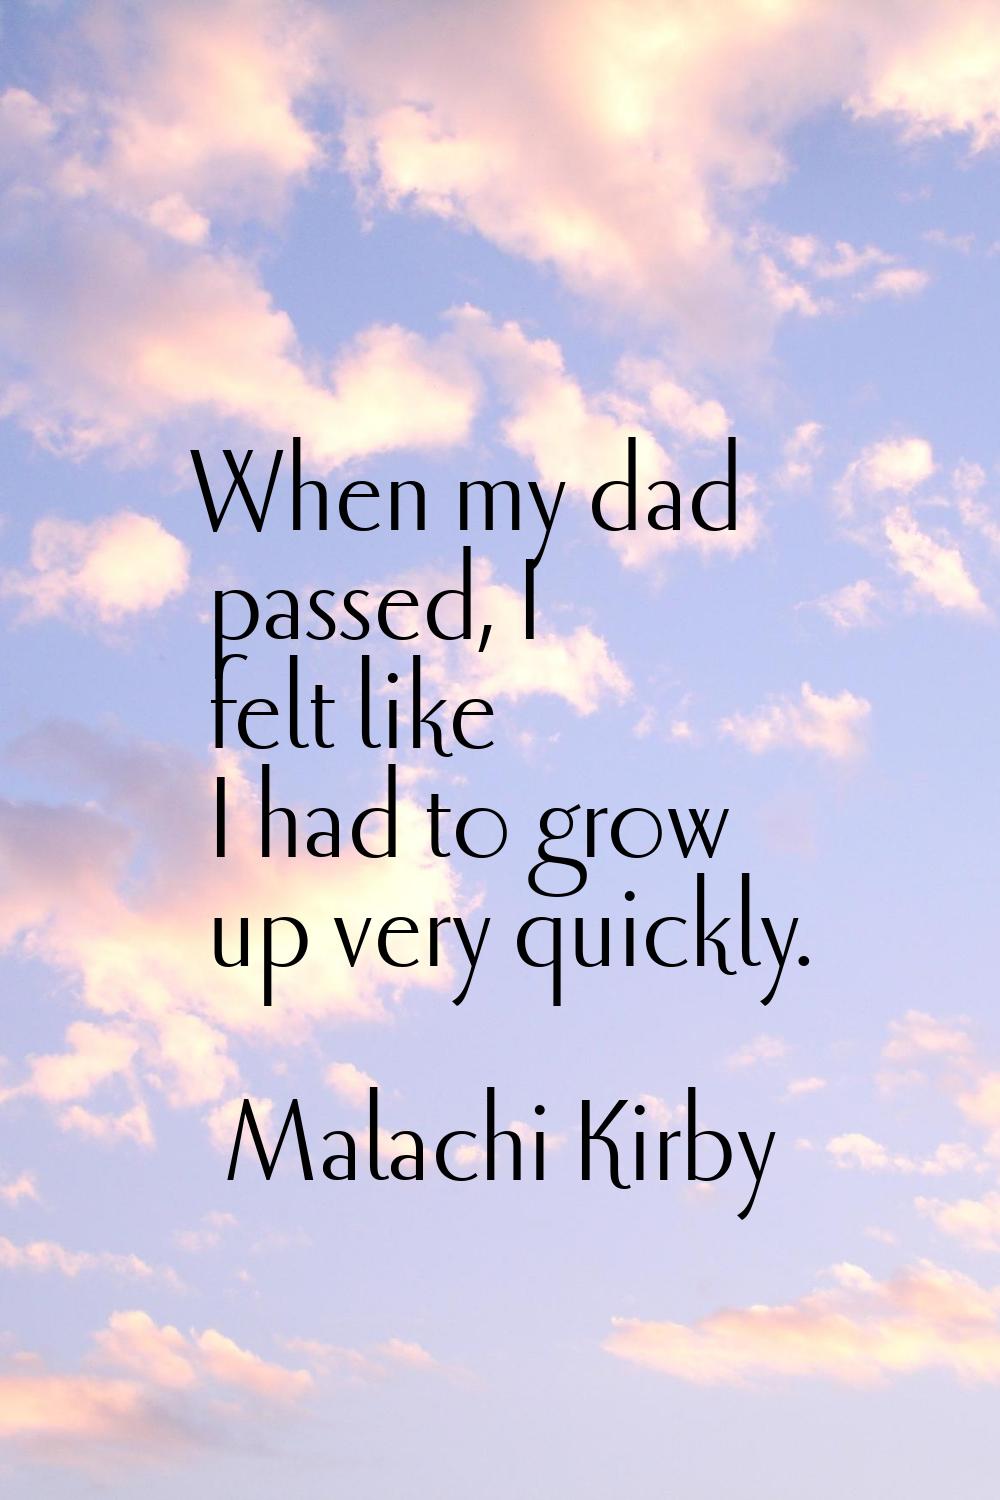 When my dad passed, I felt like I had to grow up very quickly.